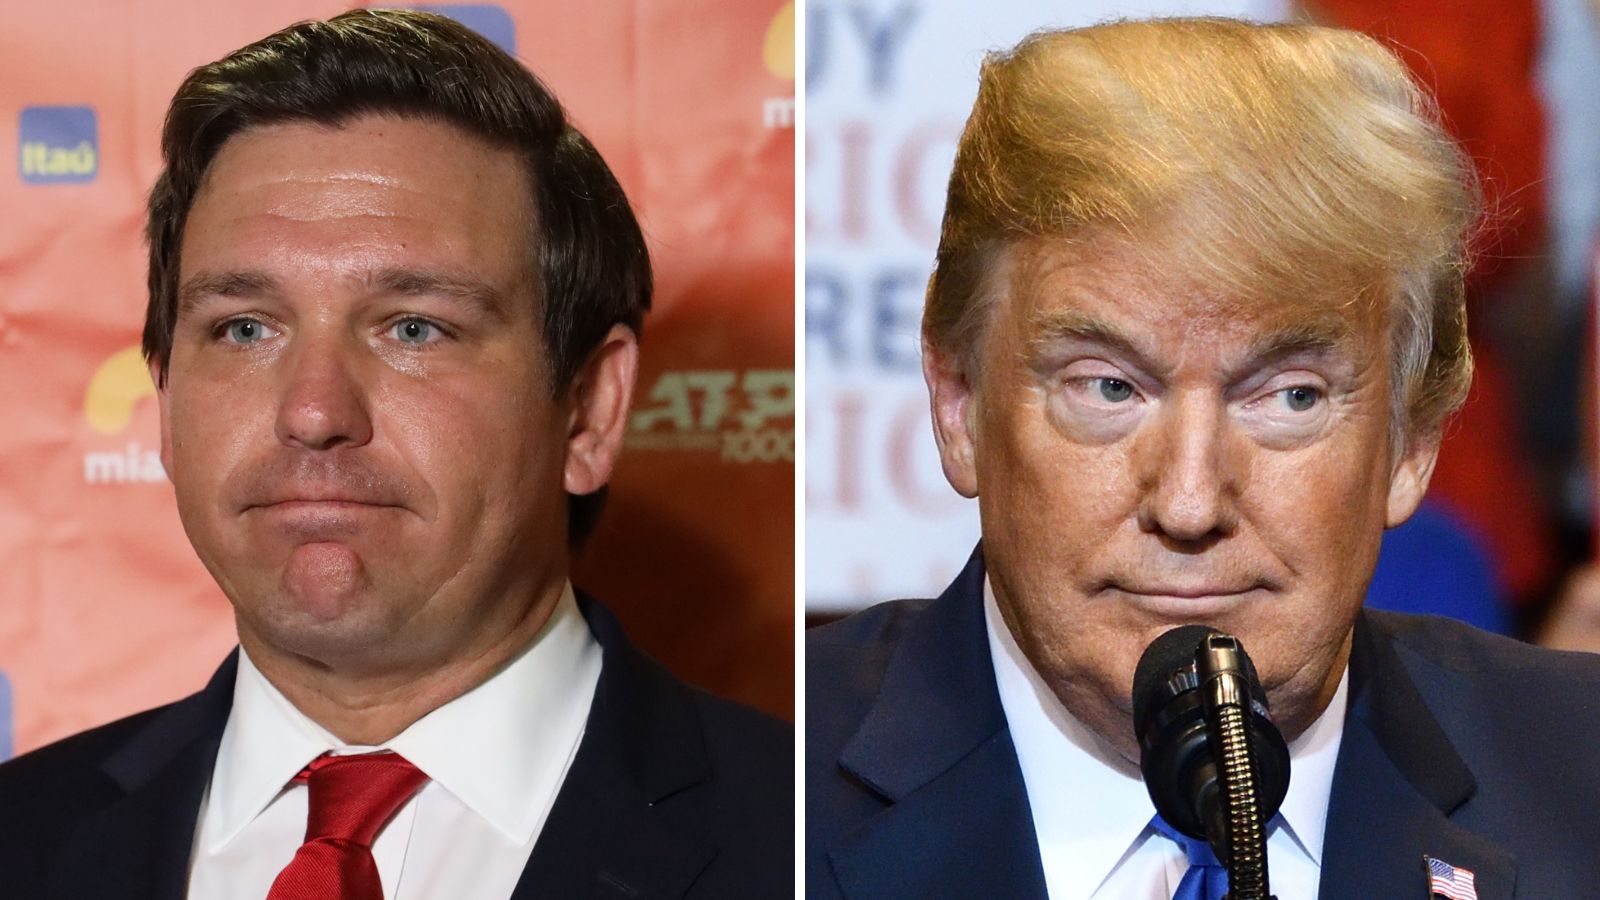 “The Chance of Him Getting Elected Is Small”: DeSantis Says Trump Is a “High-Risk” and “Low Reward” Nominee